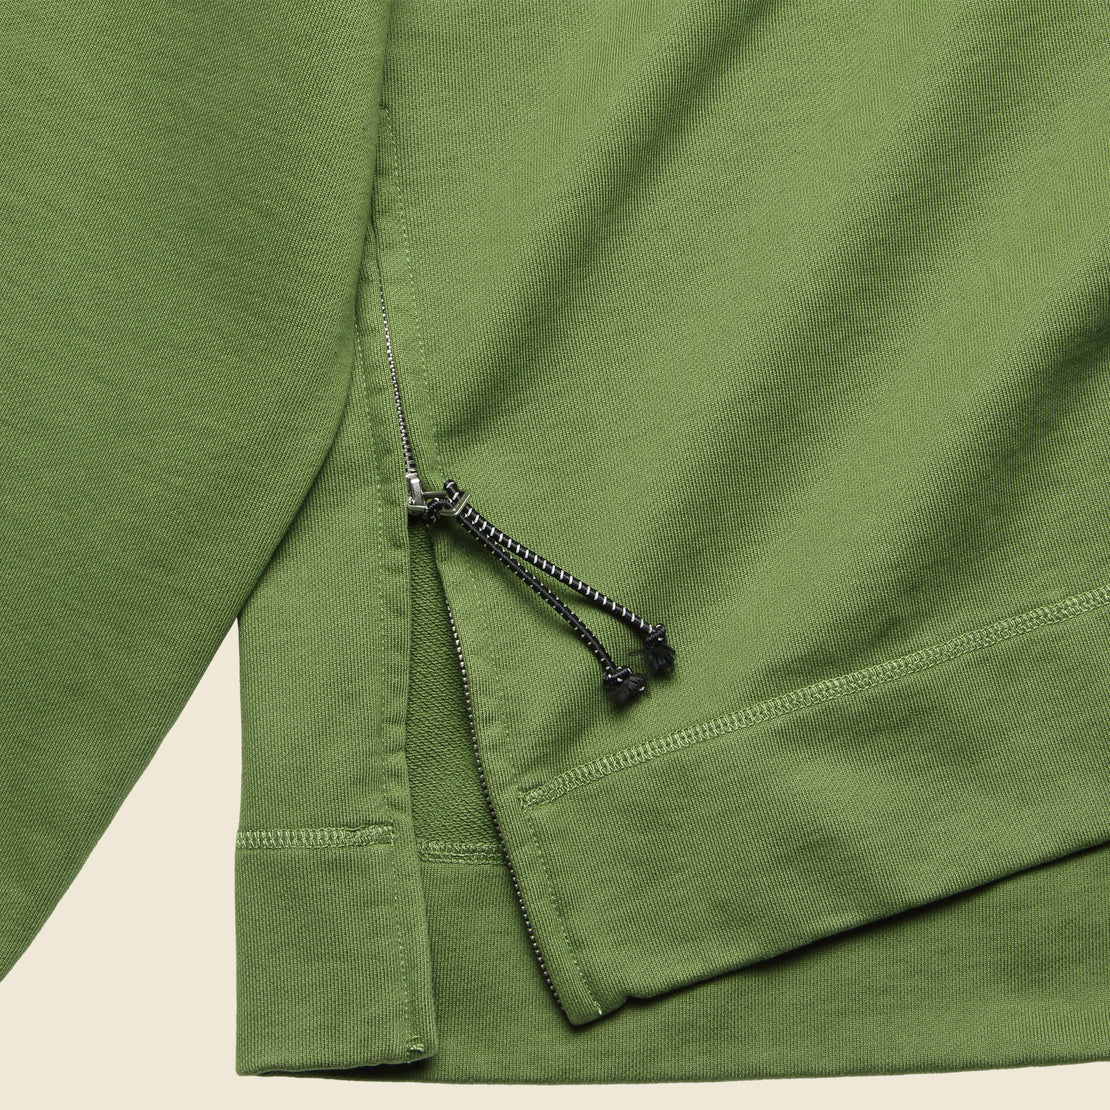 Compact Terry Popover Sweatshirt - Army Olive - Alex Mill - STAG Provisions - Tops - Fleece / Sweatshirt